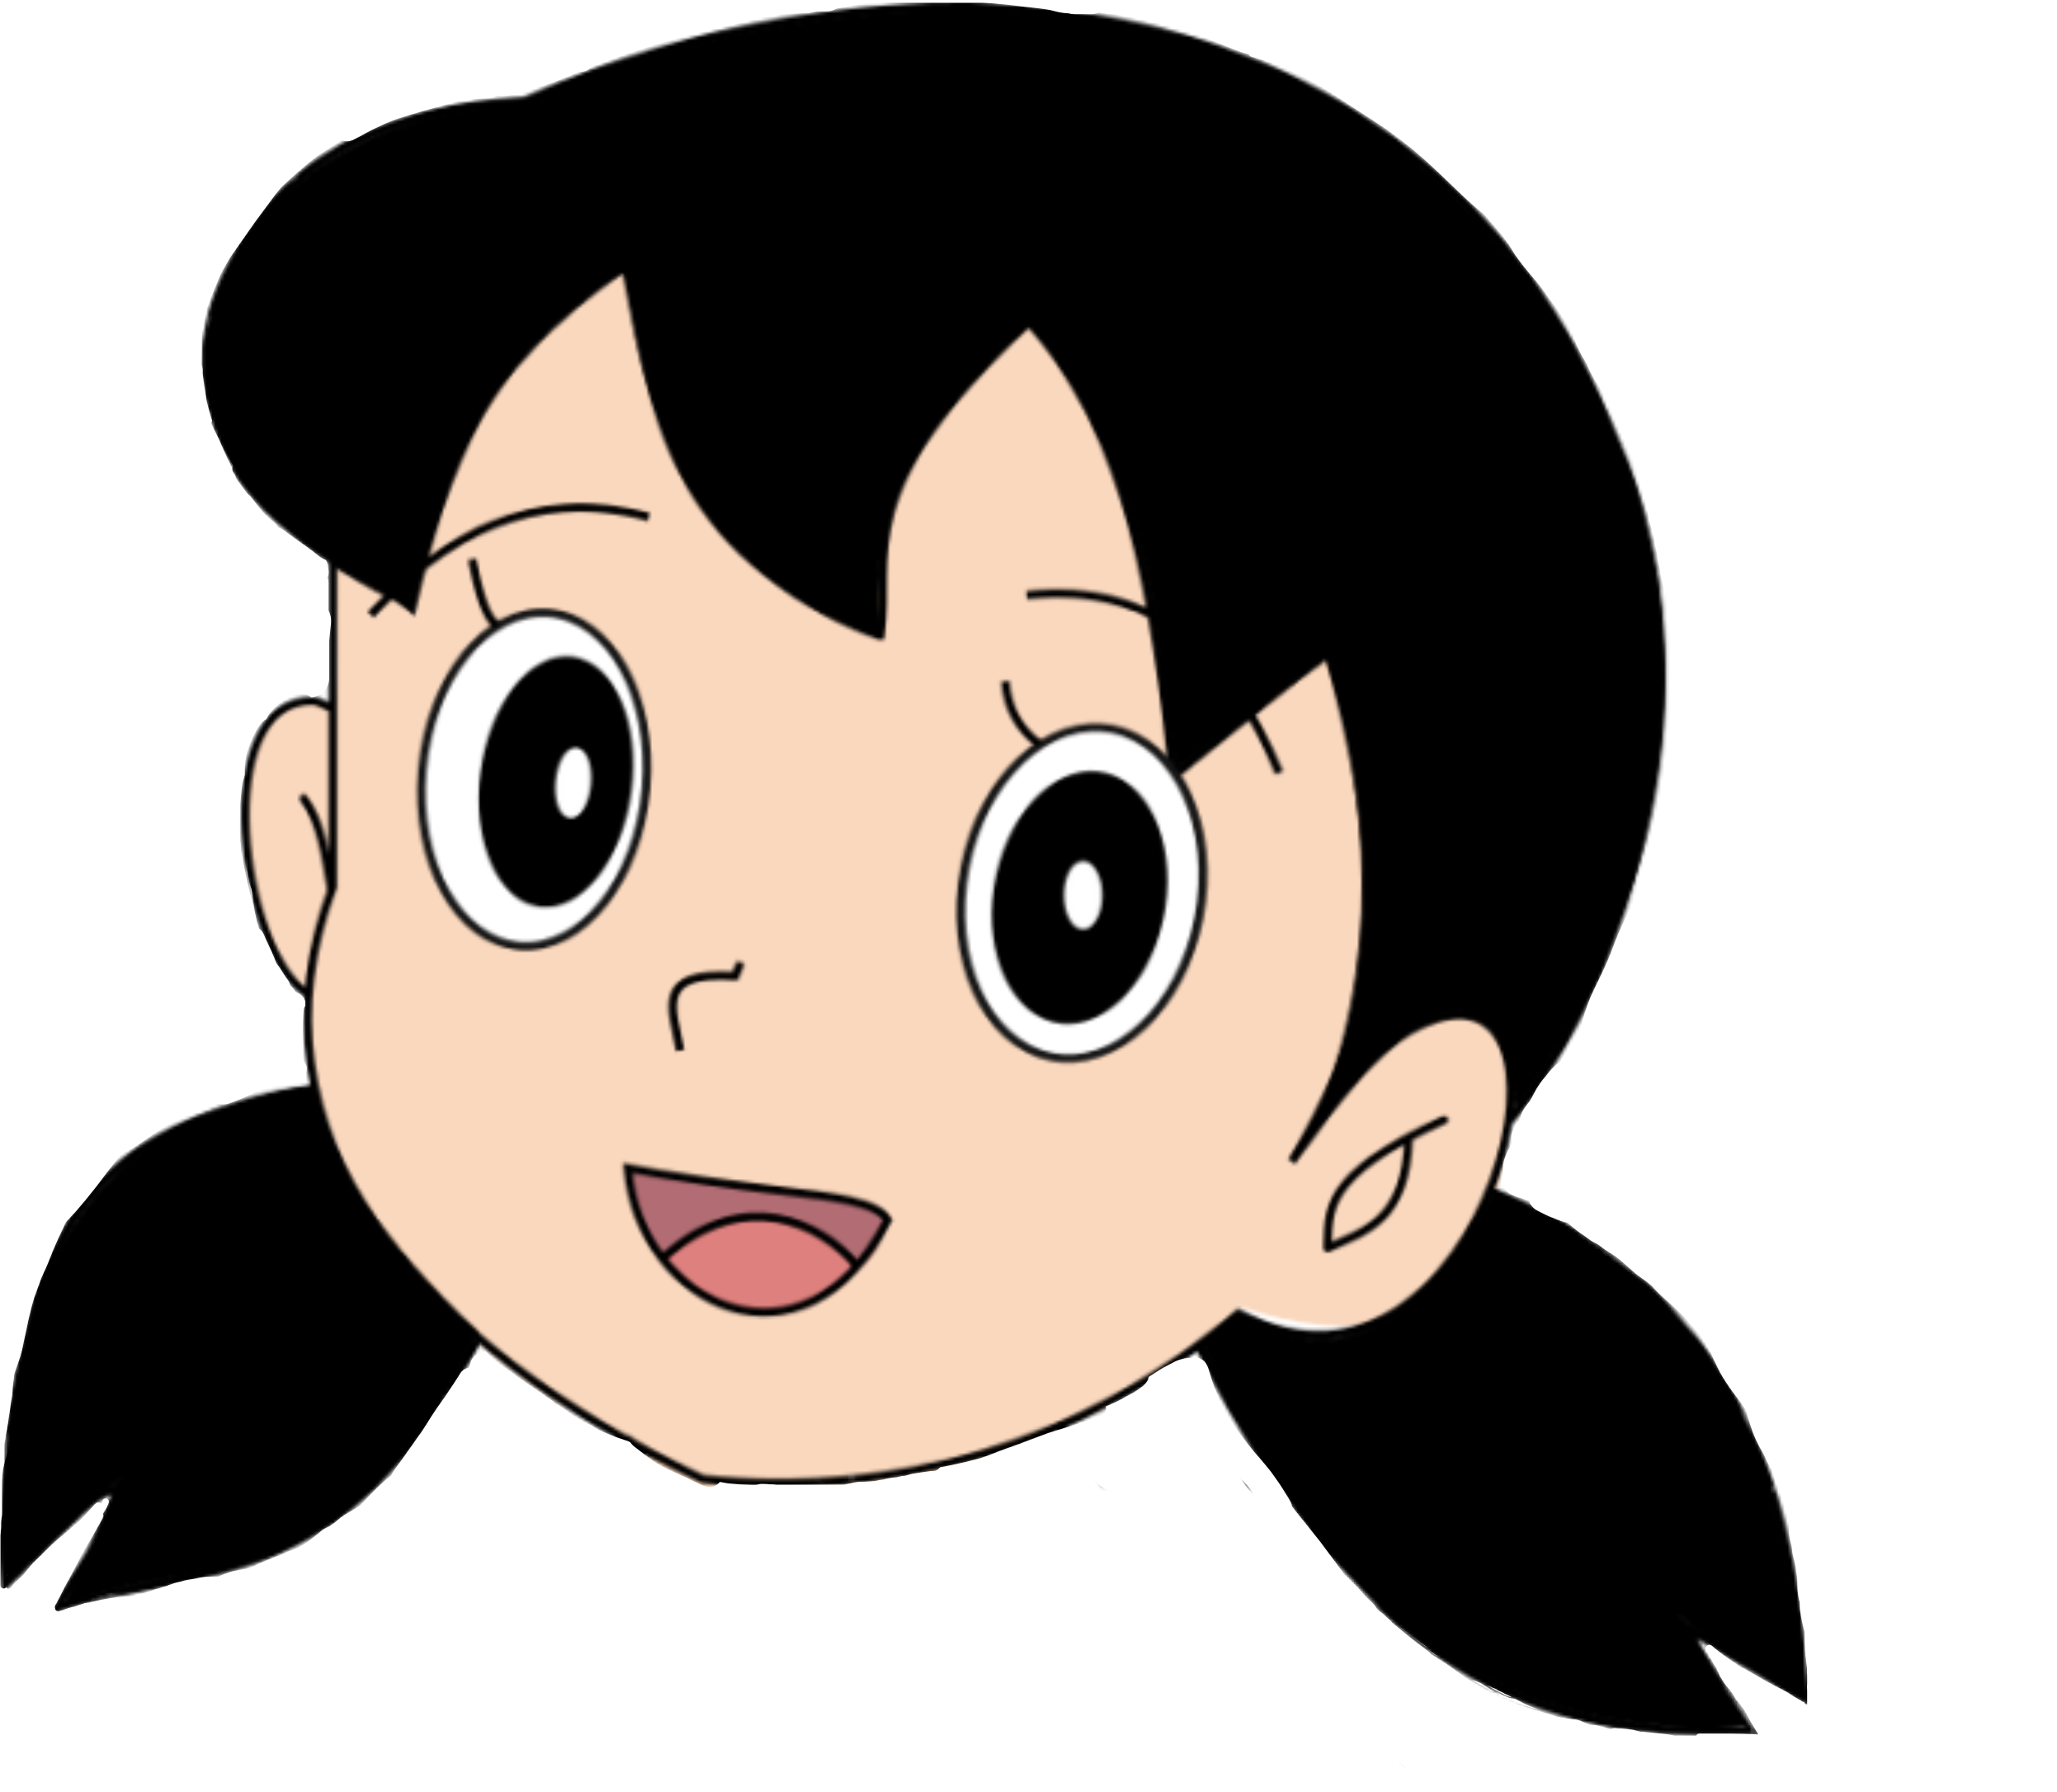 How to draw suneo